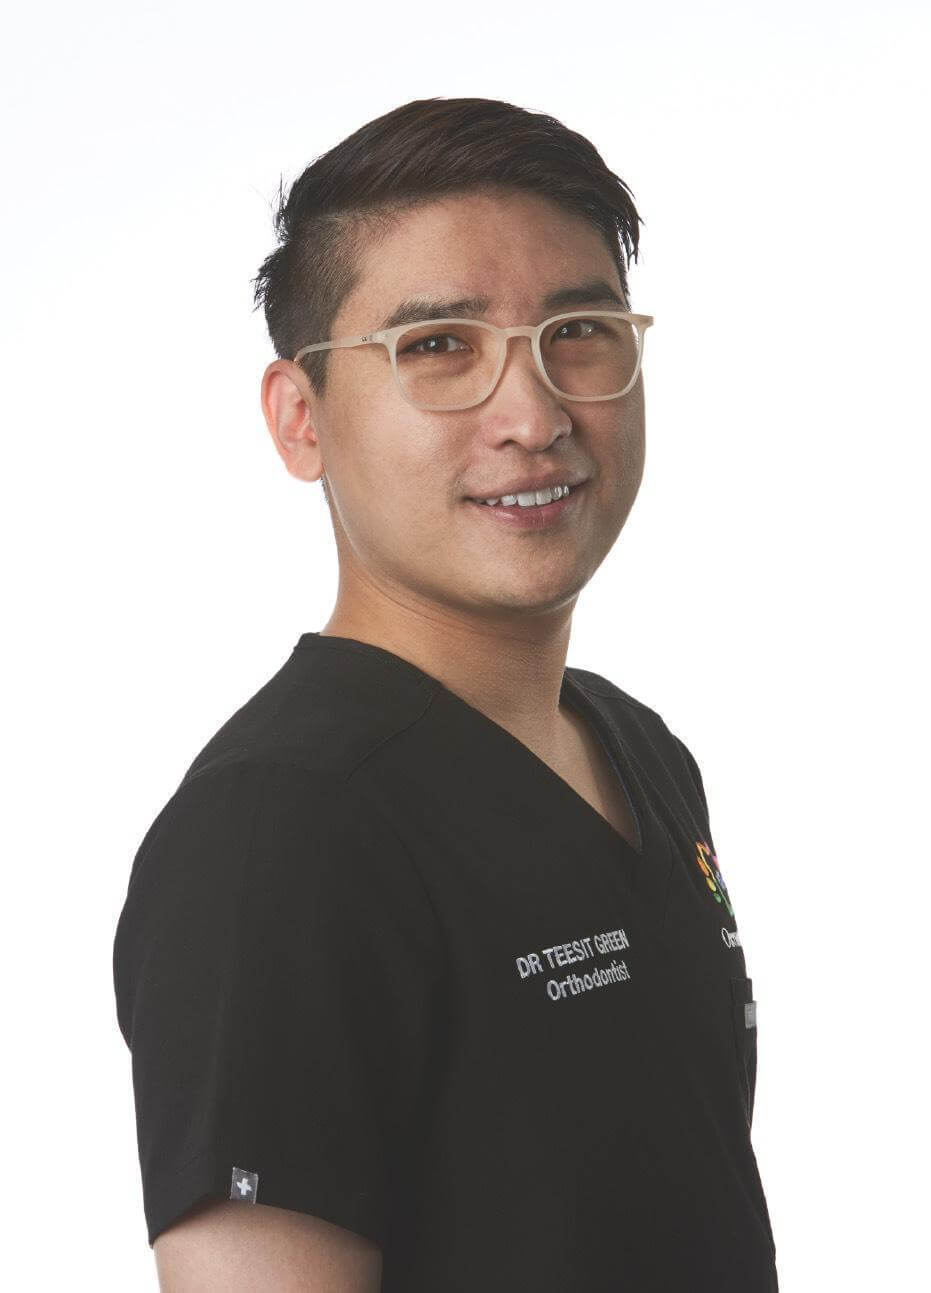 OrthoBoutique - Dr. Tee image wearing his Dentist uniform